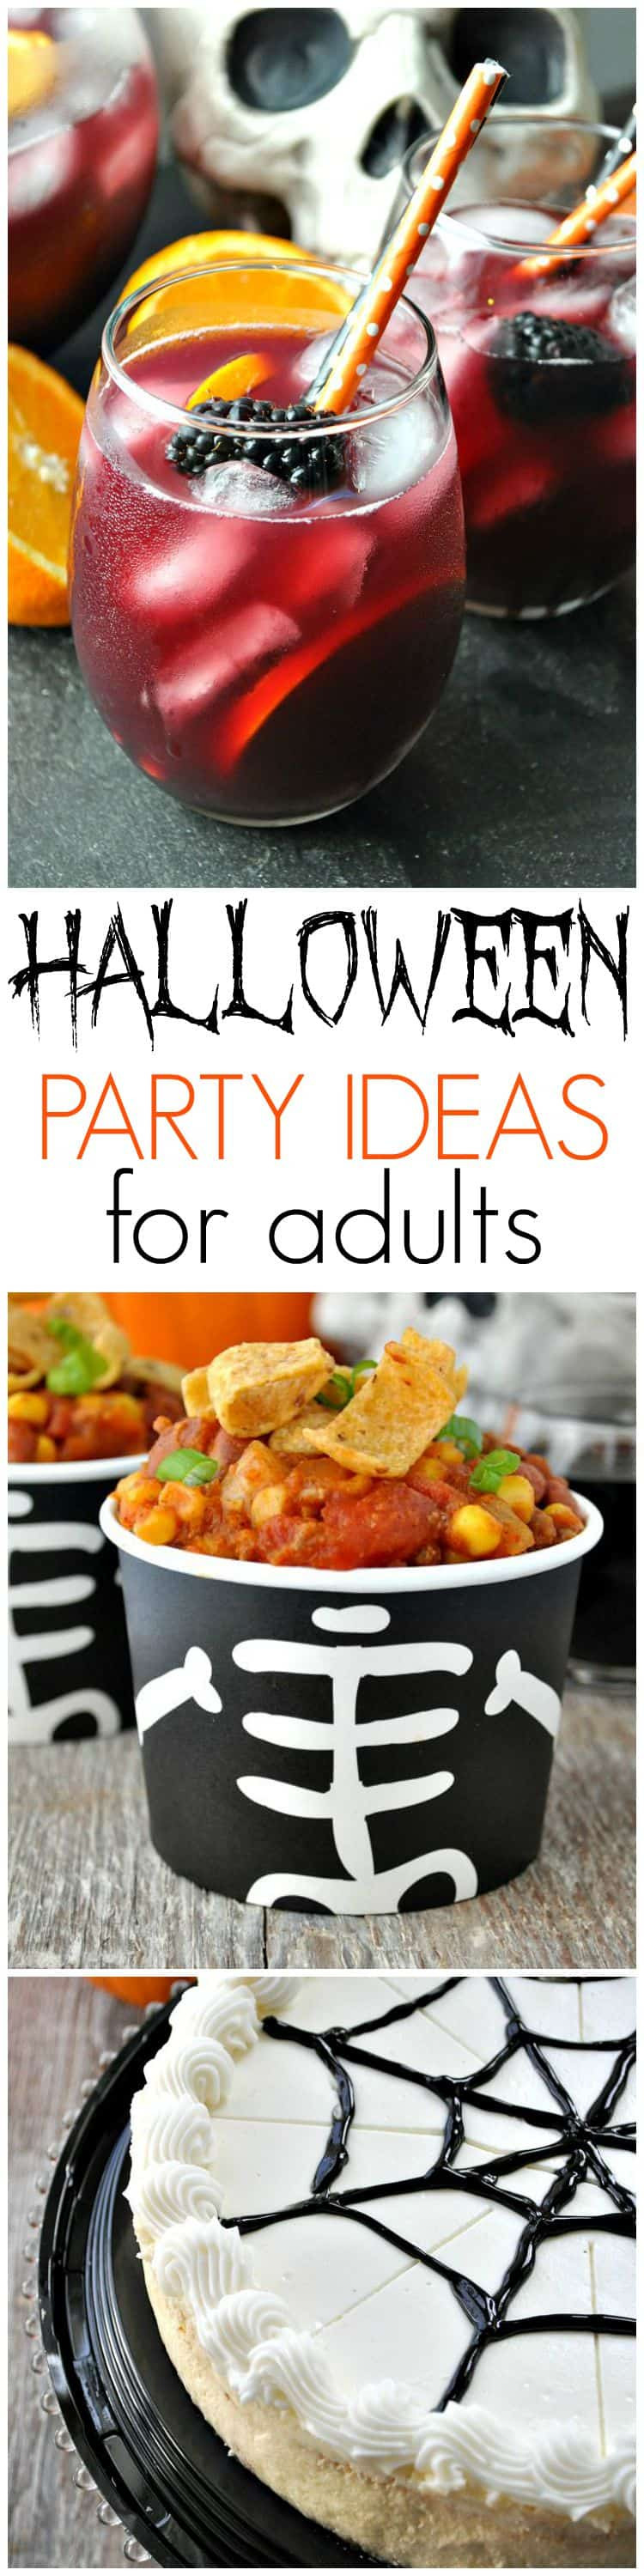 Halloween Party Game Ideas For Adults
 Slow Cooker Pumpkin Chili Halloween Party Ideas for